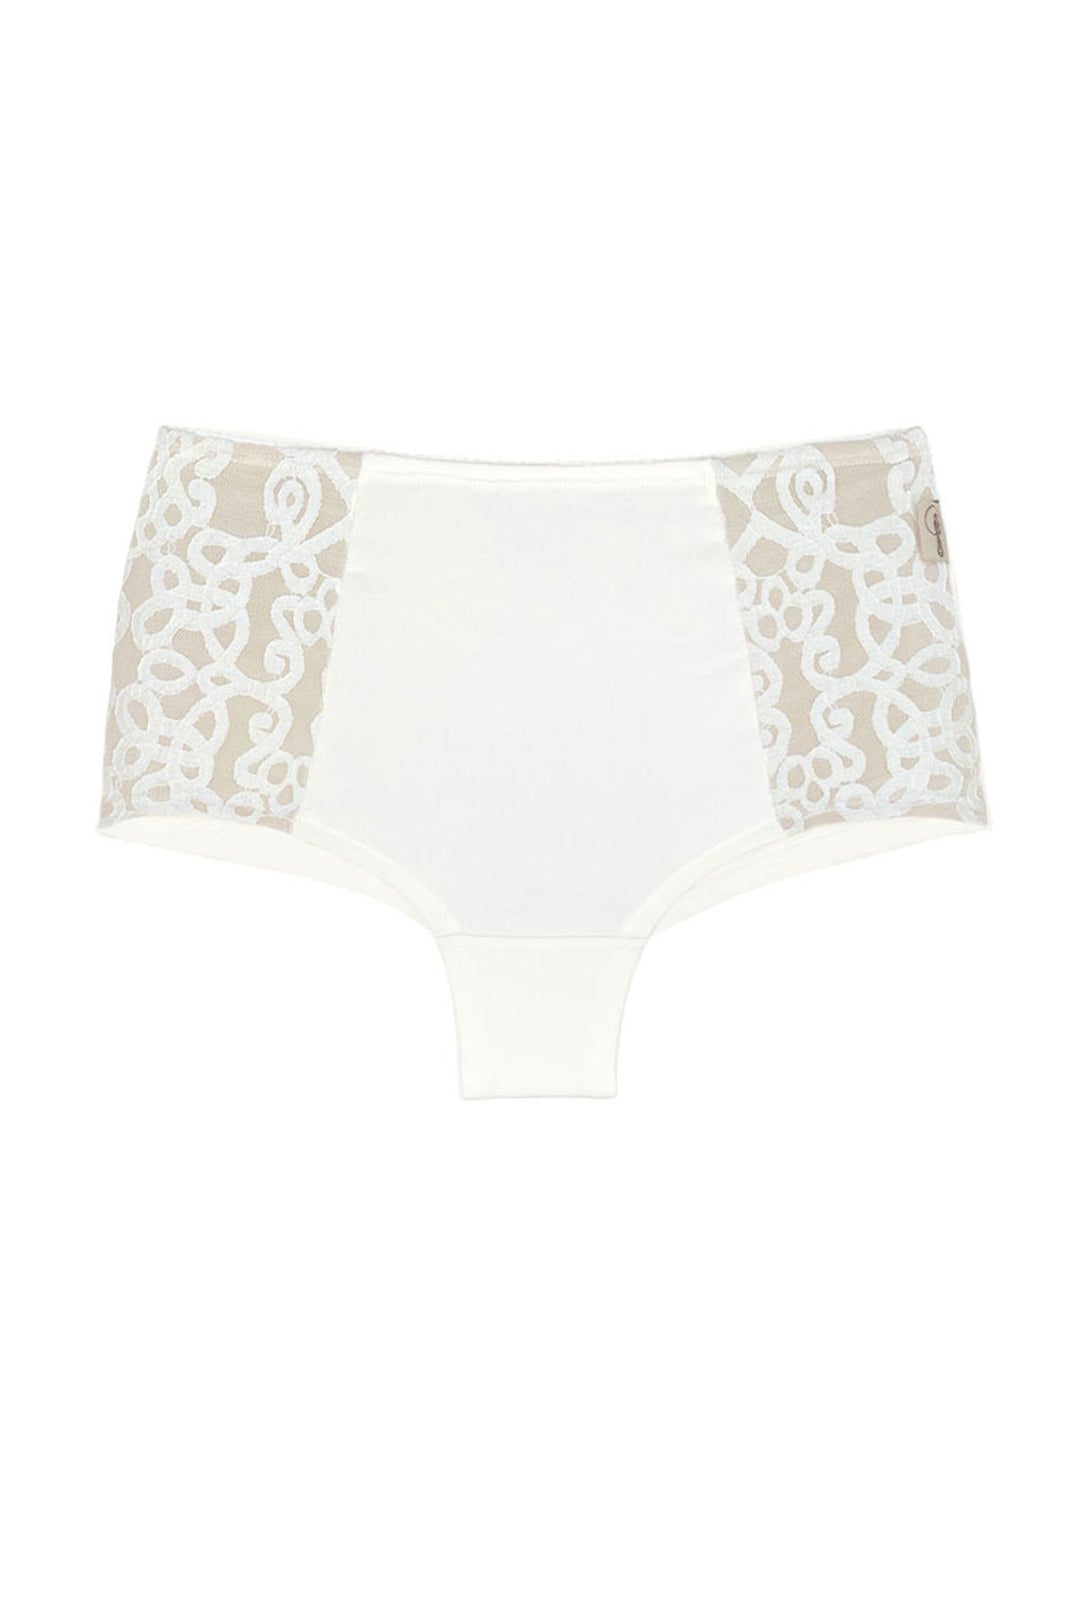 Sophia organic and lace high waisted knickers in natural